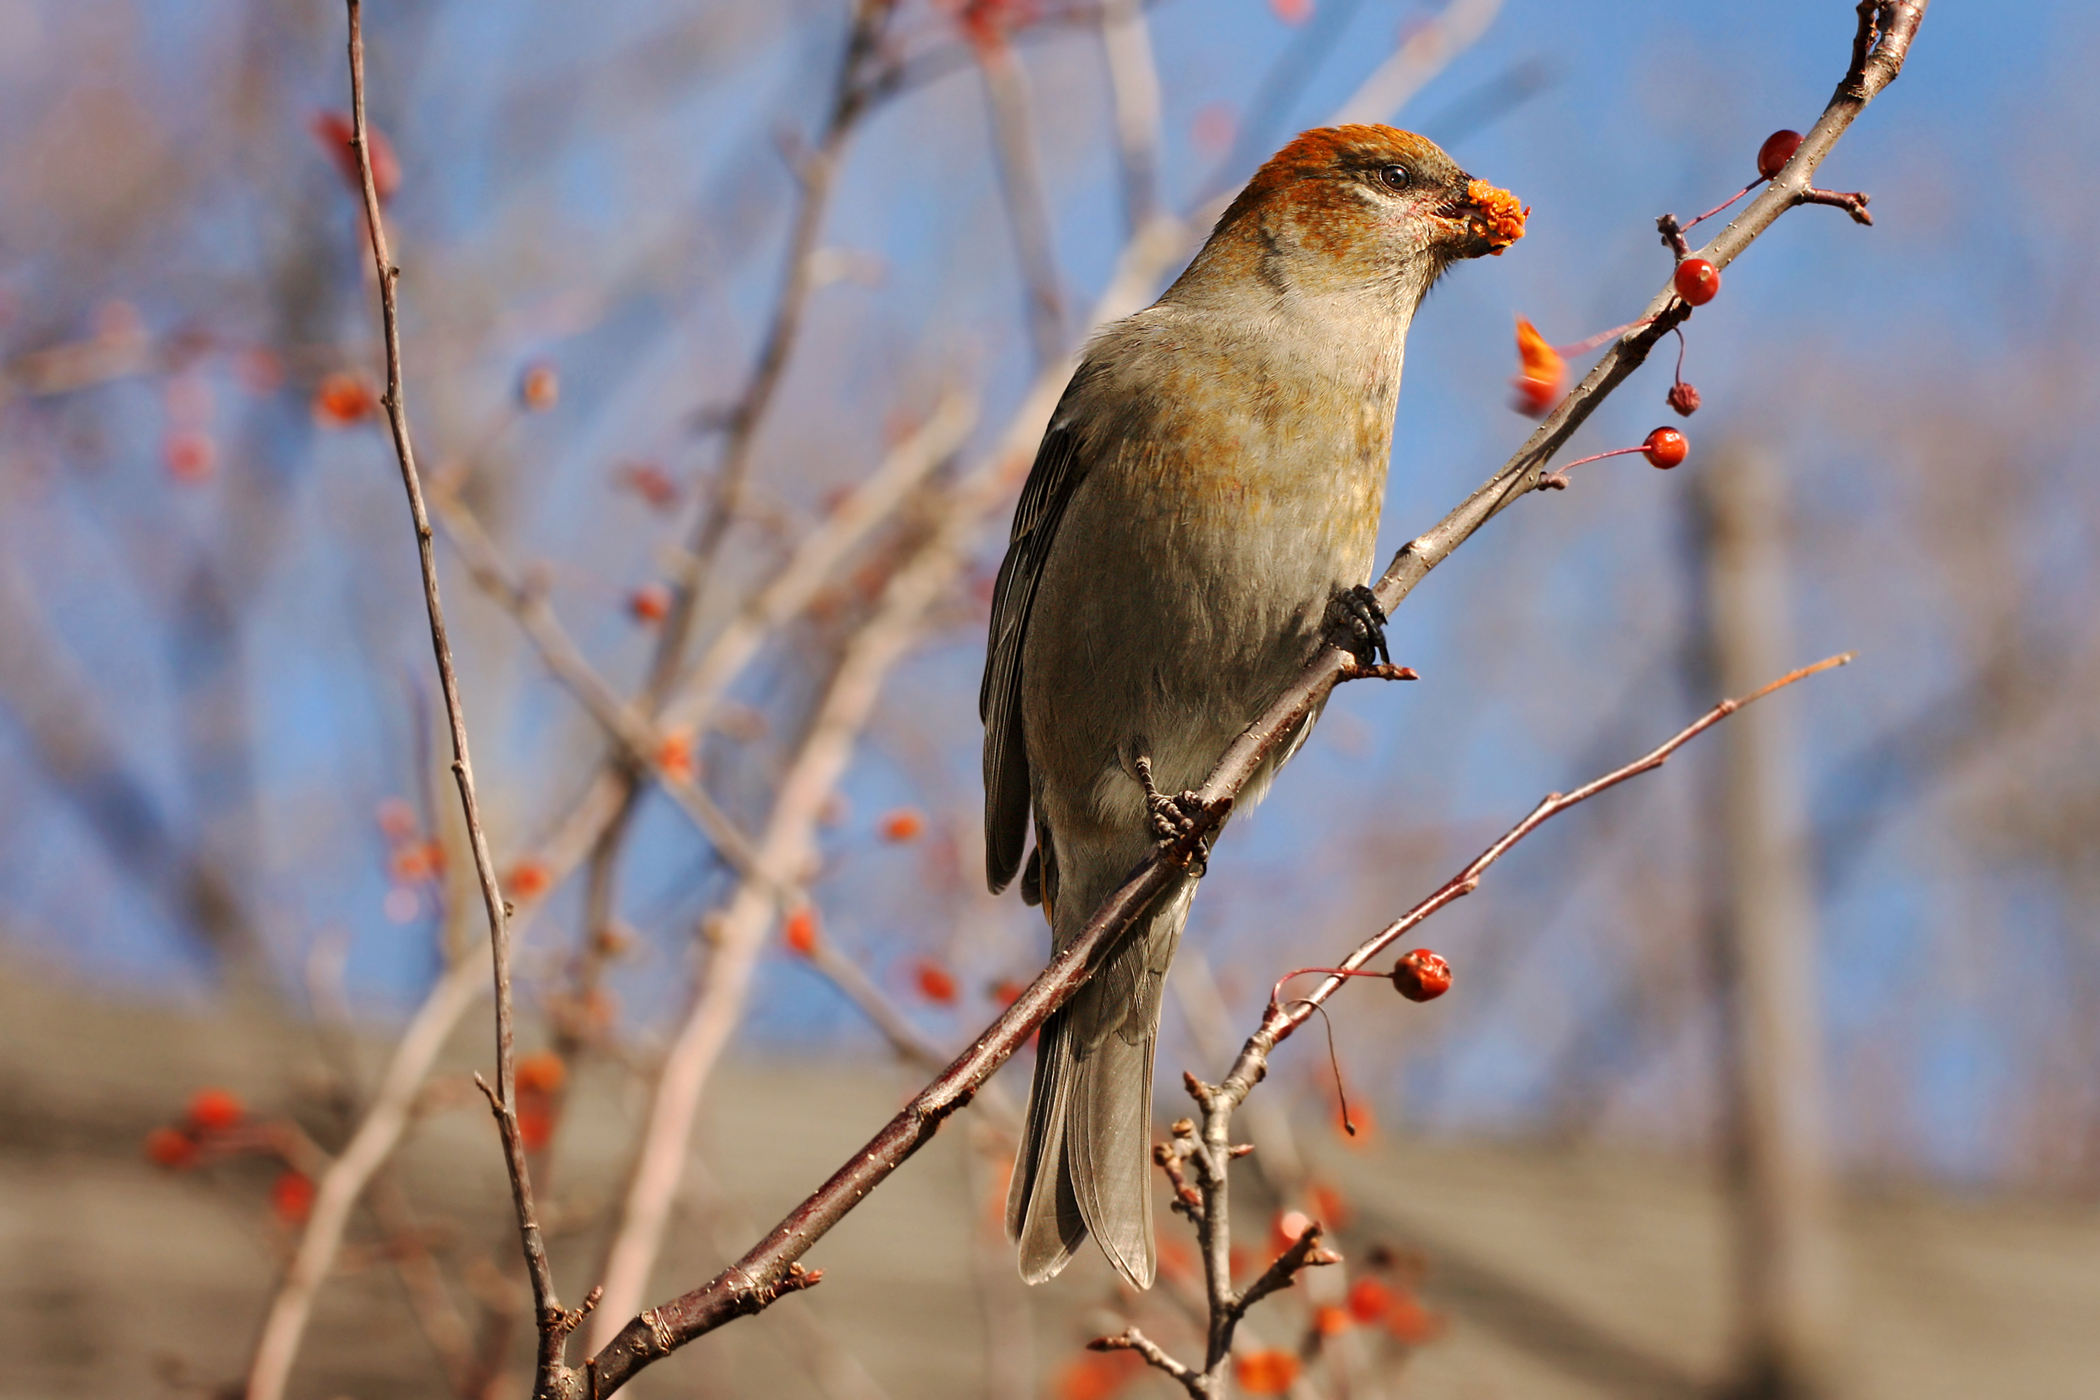 A Very Berry Pine Grosbeak (user submitted)